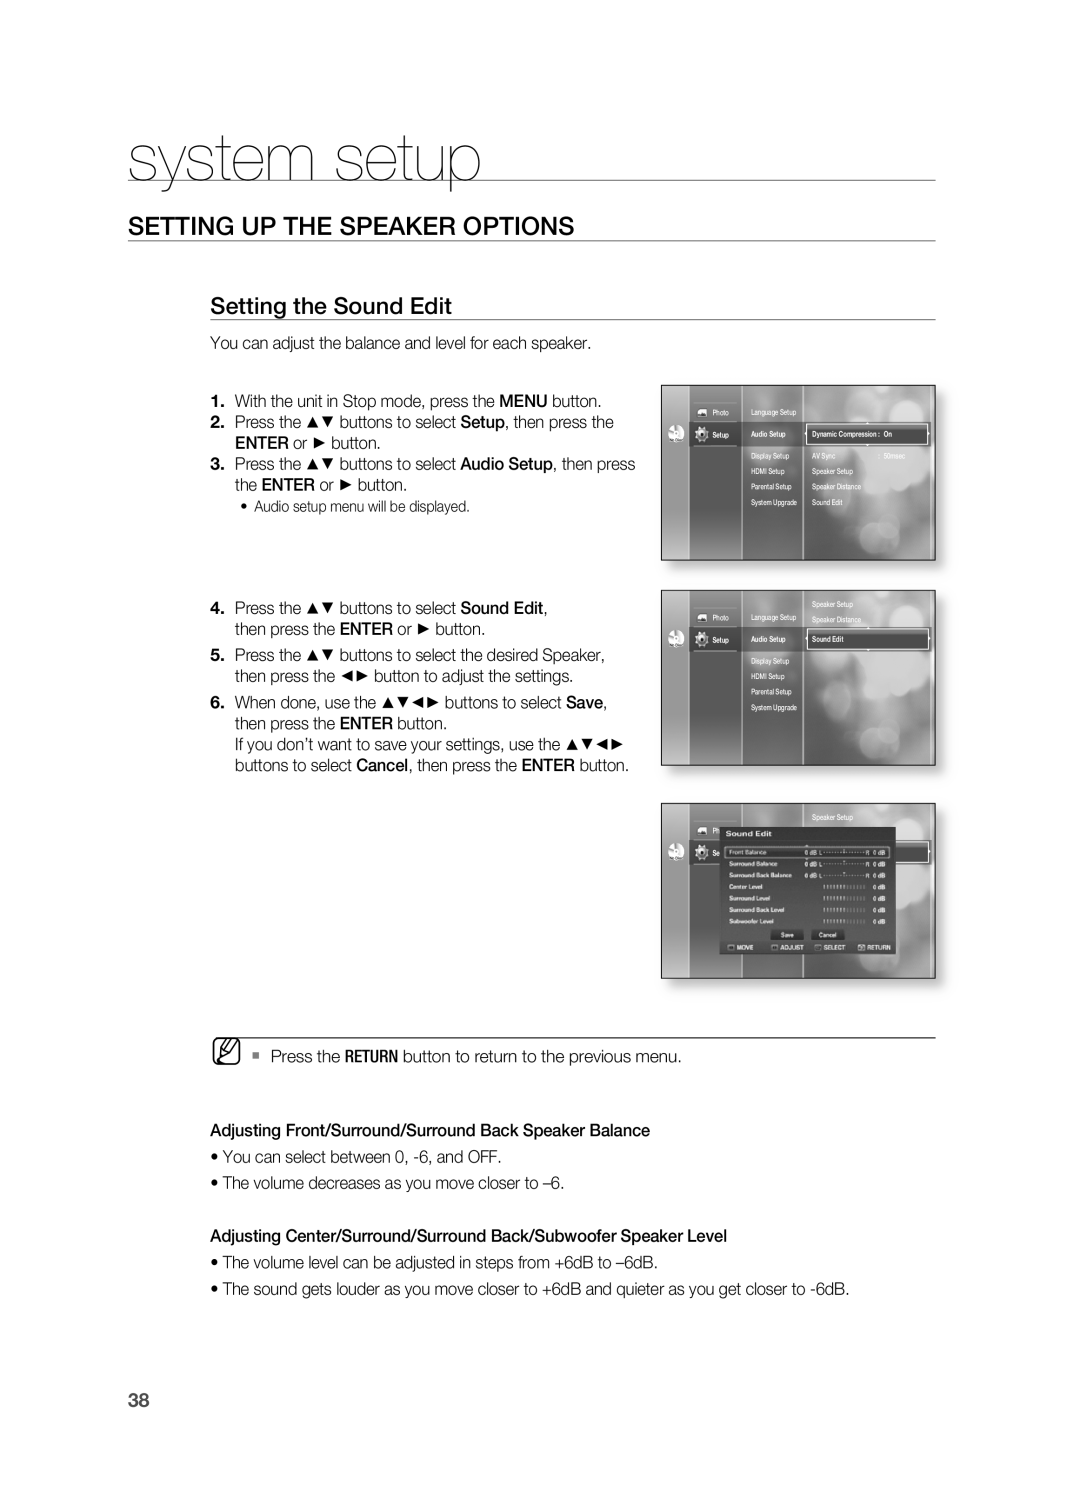 Samsung HT-BD2S manual Setting the Sound Edit, system setup, SETTIng UP THE SPEAKER OPTIOnS 